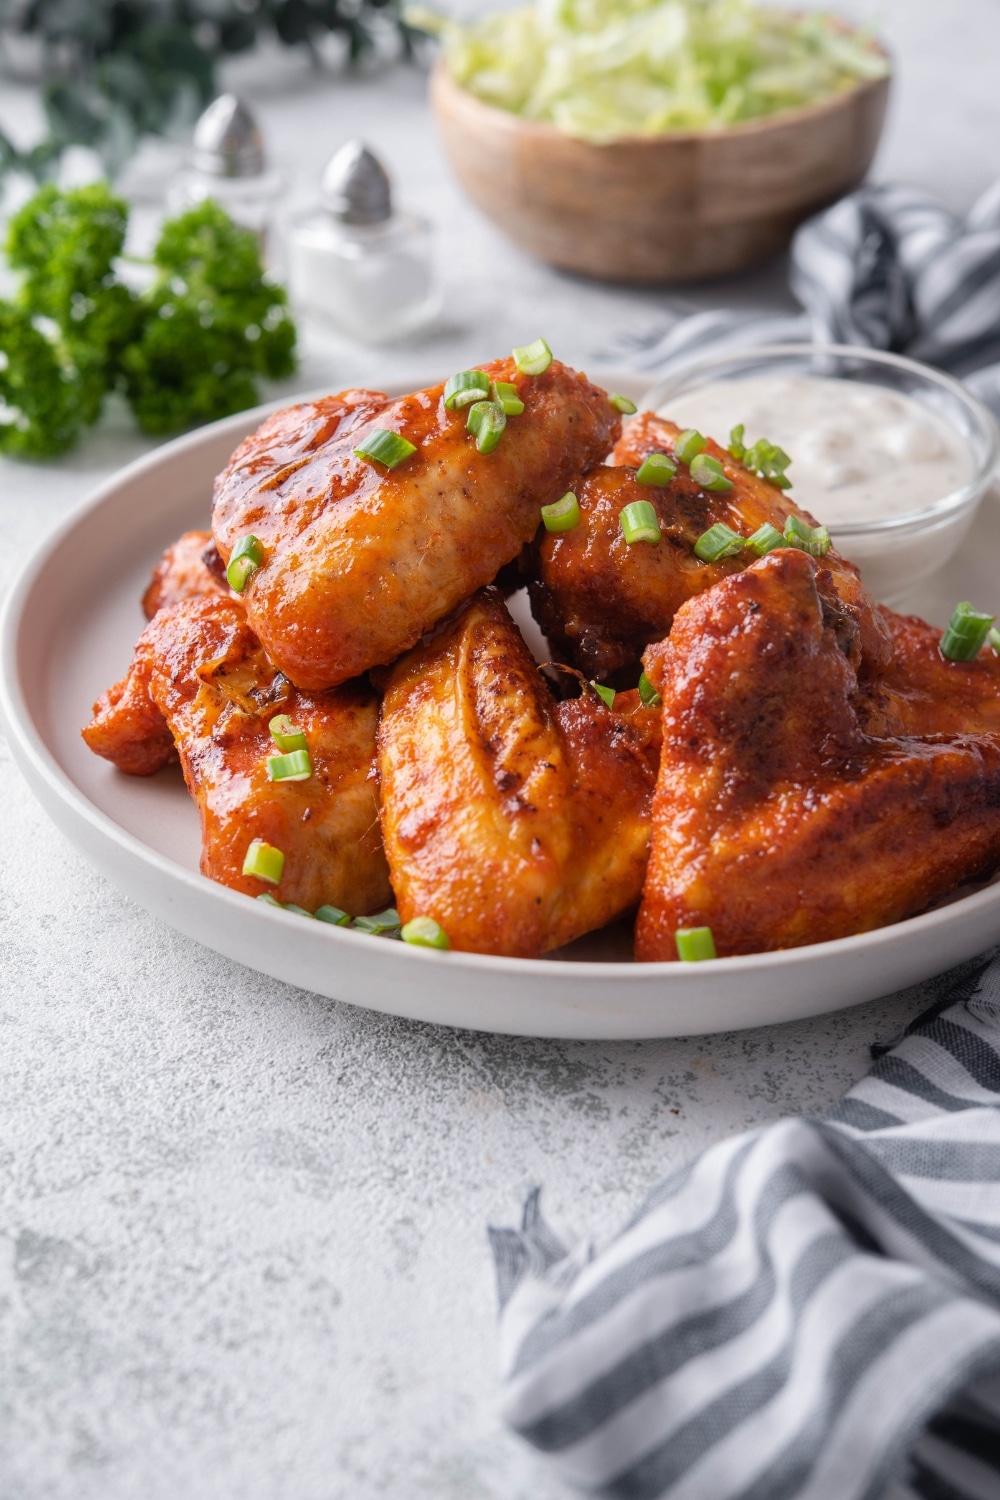 Baked chicken wings garnished with chopped green onions and served with ranch.